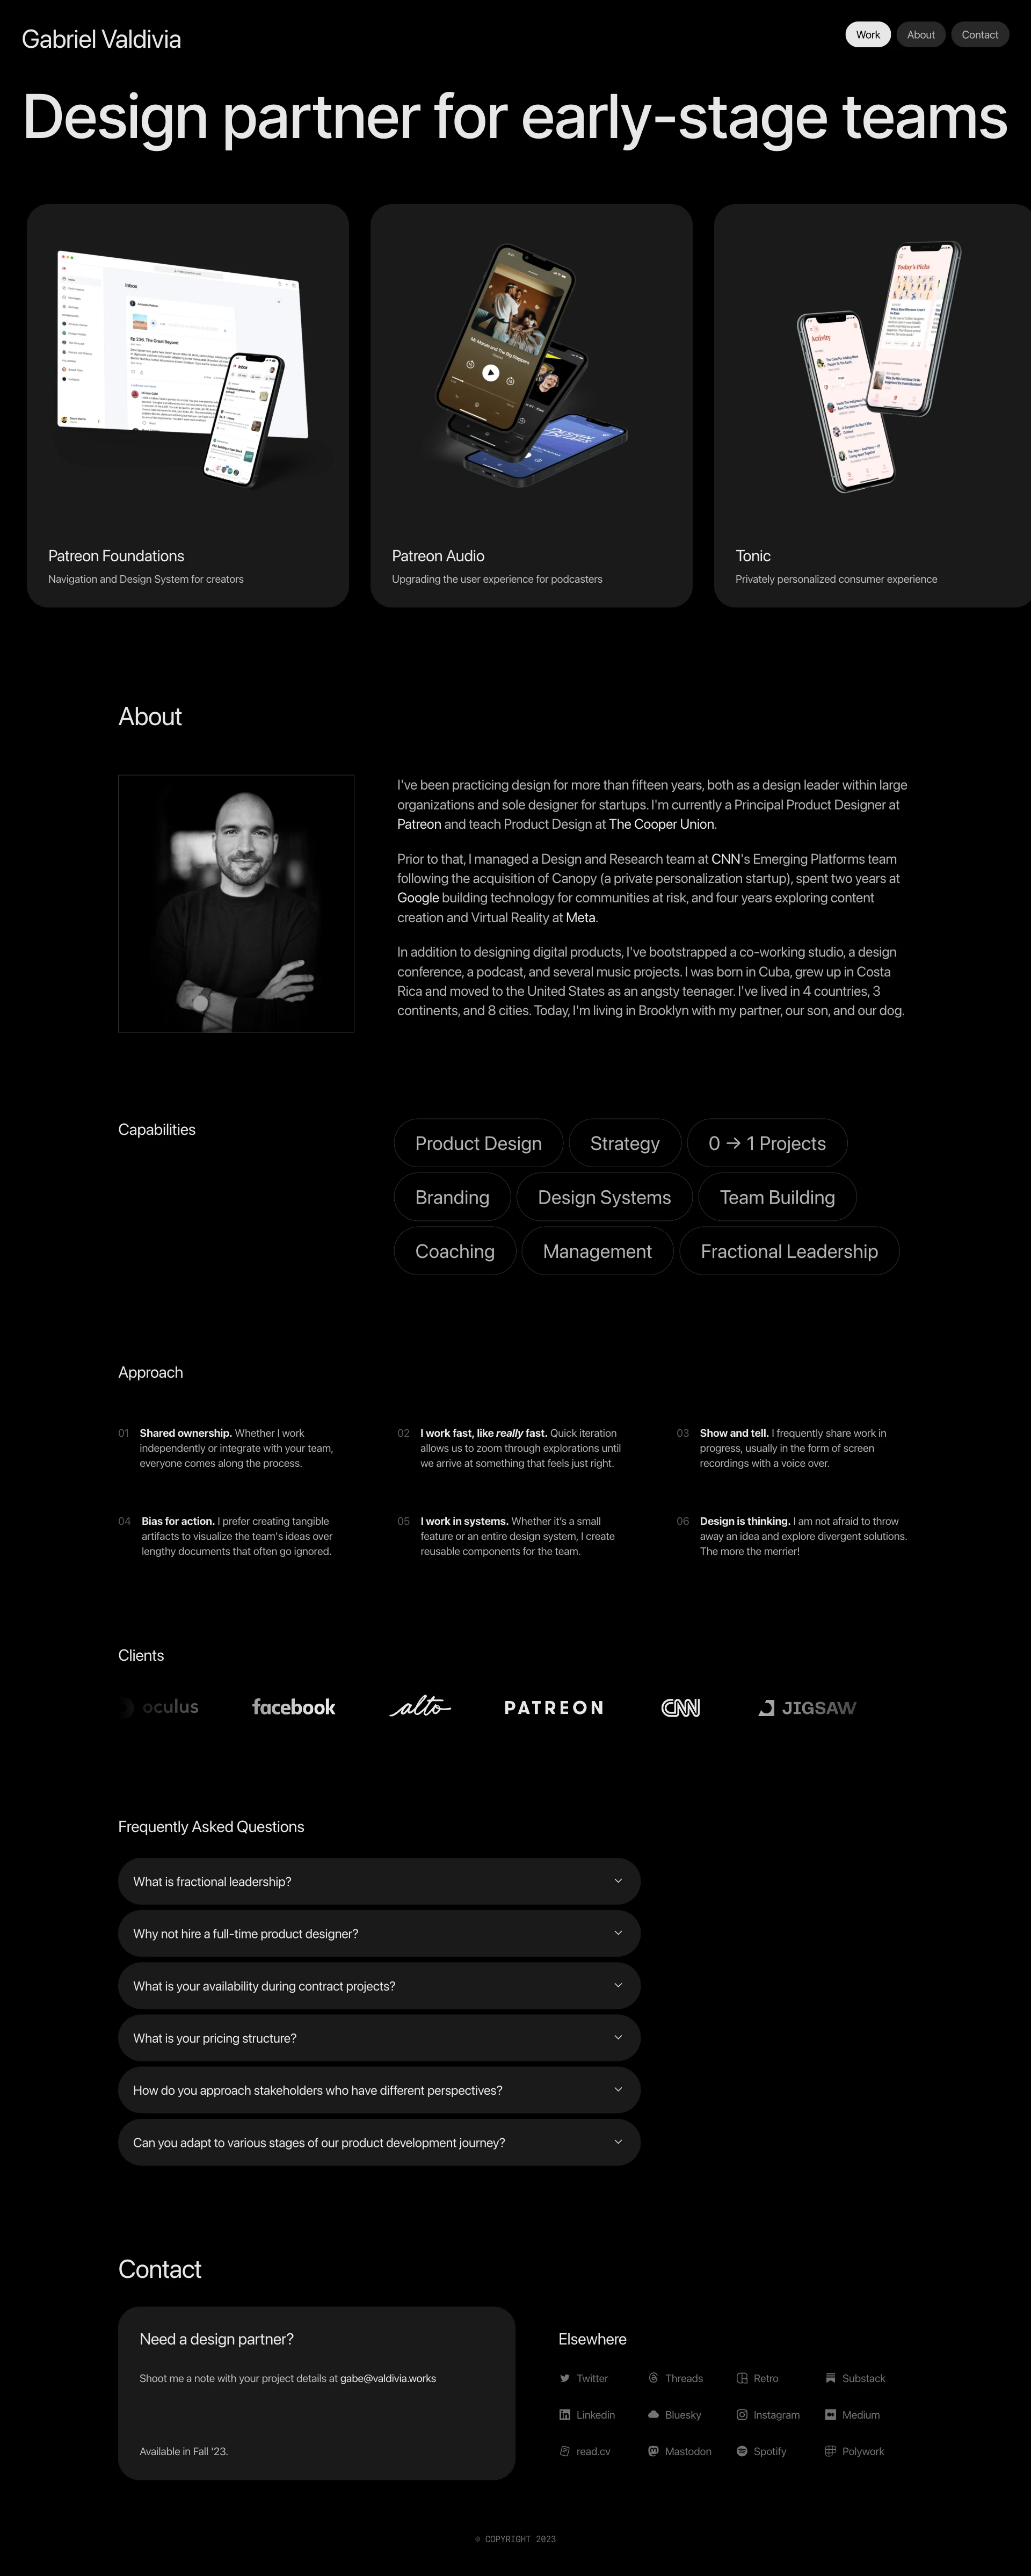 Gabriel Valdivia Landing Page Example: I've been practicing design for more than fifteen years, both as a design leader within large organizations and sole designer for startups. I'm currently a Principal Product Designer at Patreon and teach Product Design at The Cooper Union. Prior to that, I managed a Design and Research team at CNN's Emerging Platforms team following the acquisition of Canopy (a private personalization startup), spent two years at Google building technology for communities at risk, and four years exploring content creation and Virtual Reality at Meta.